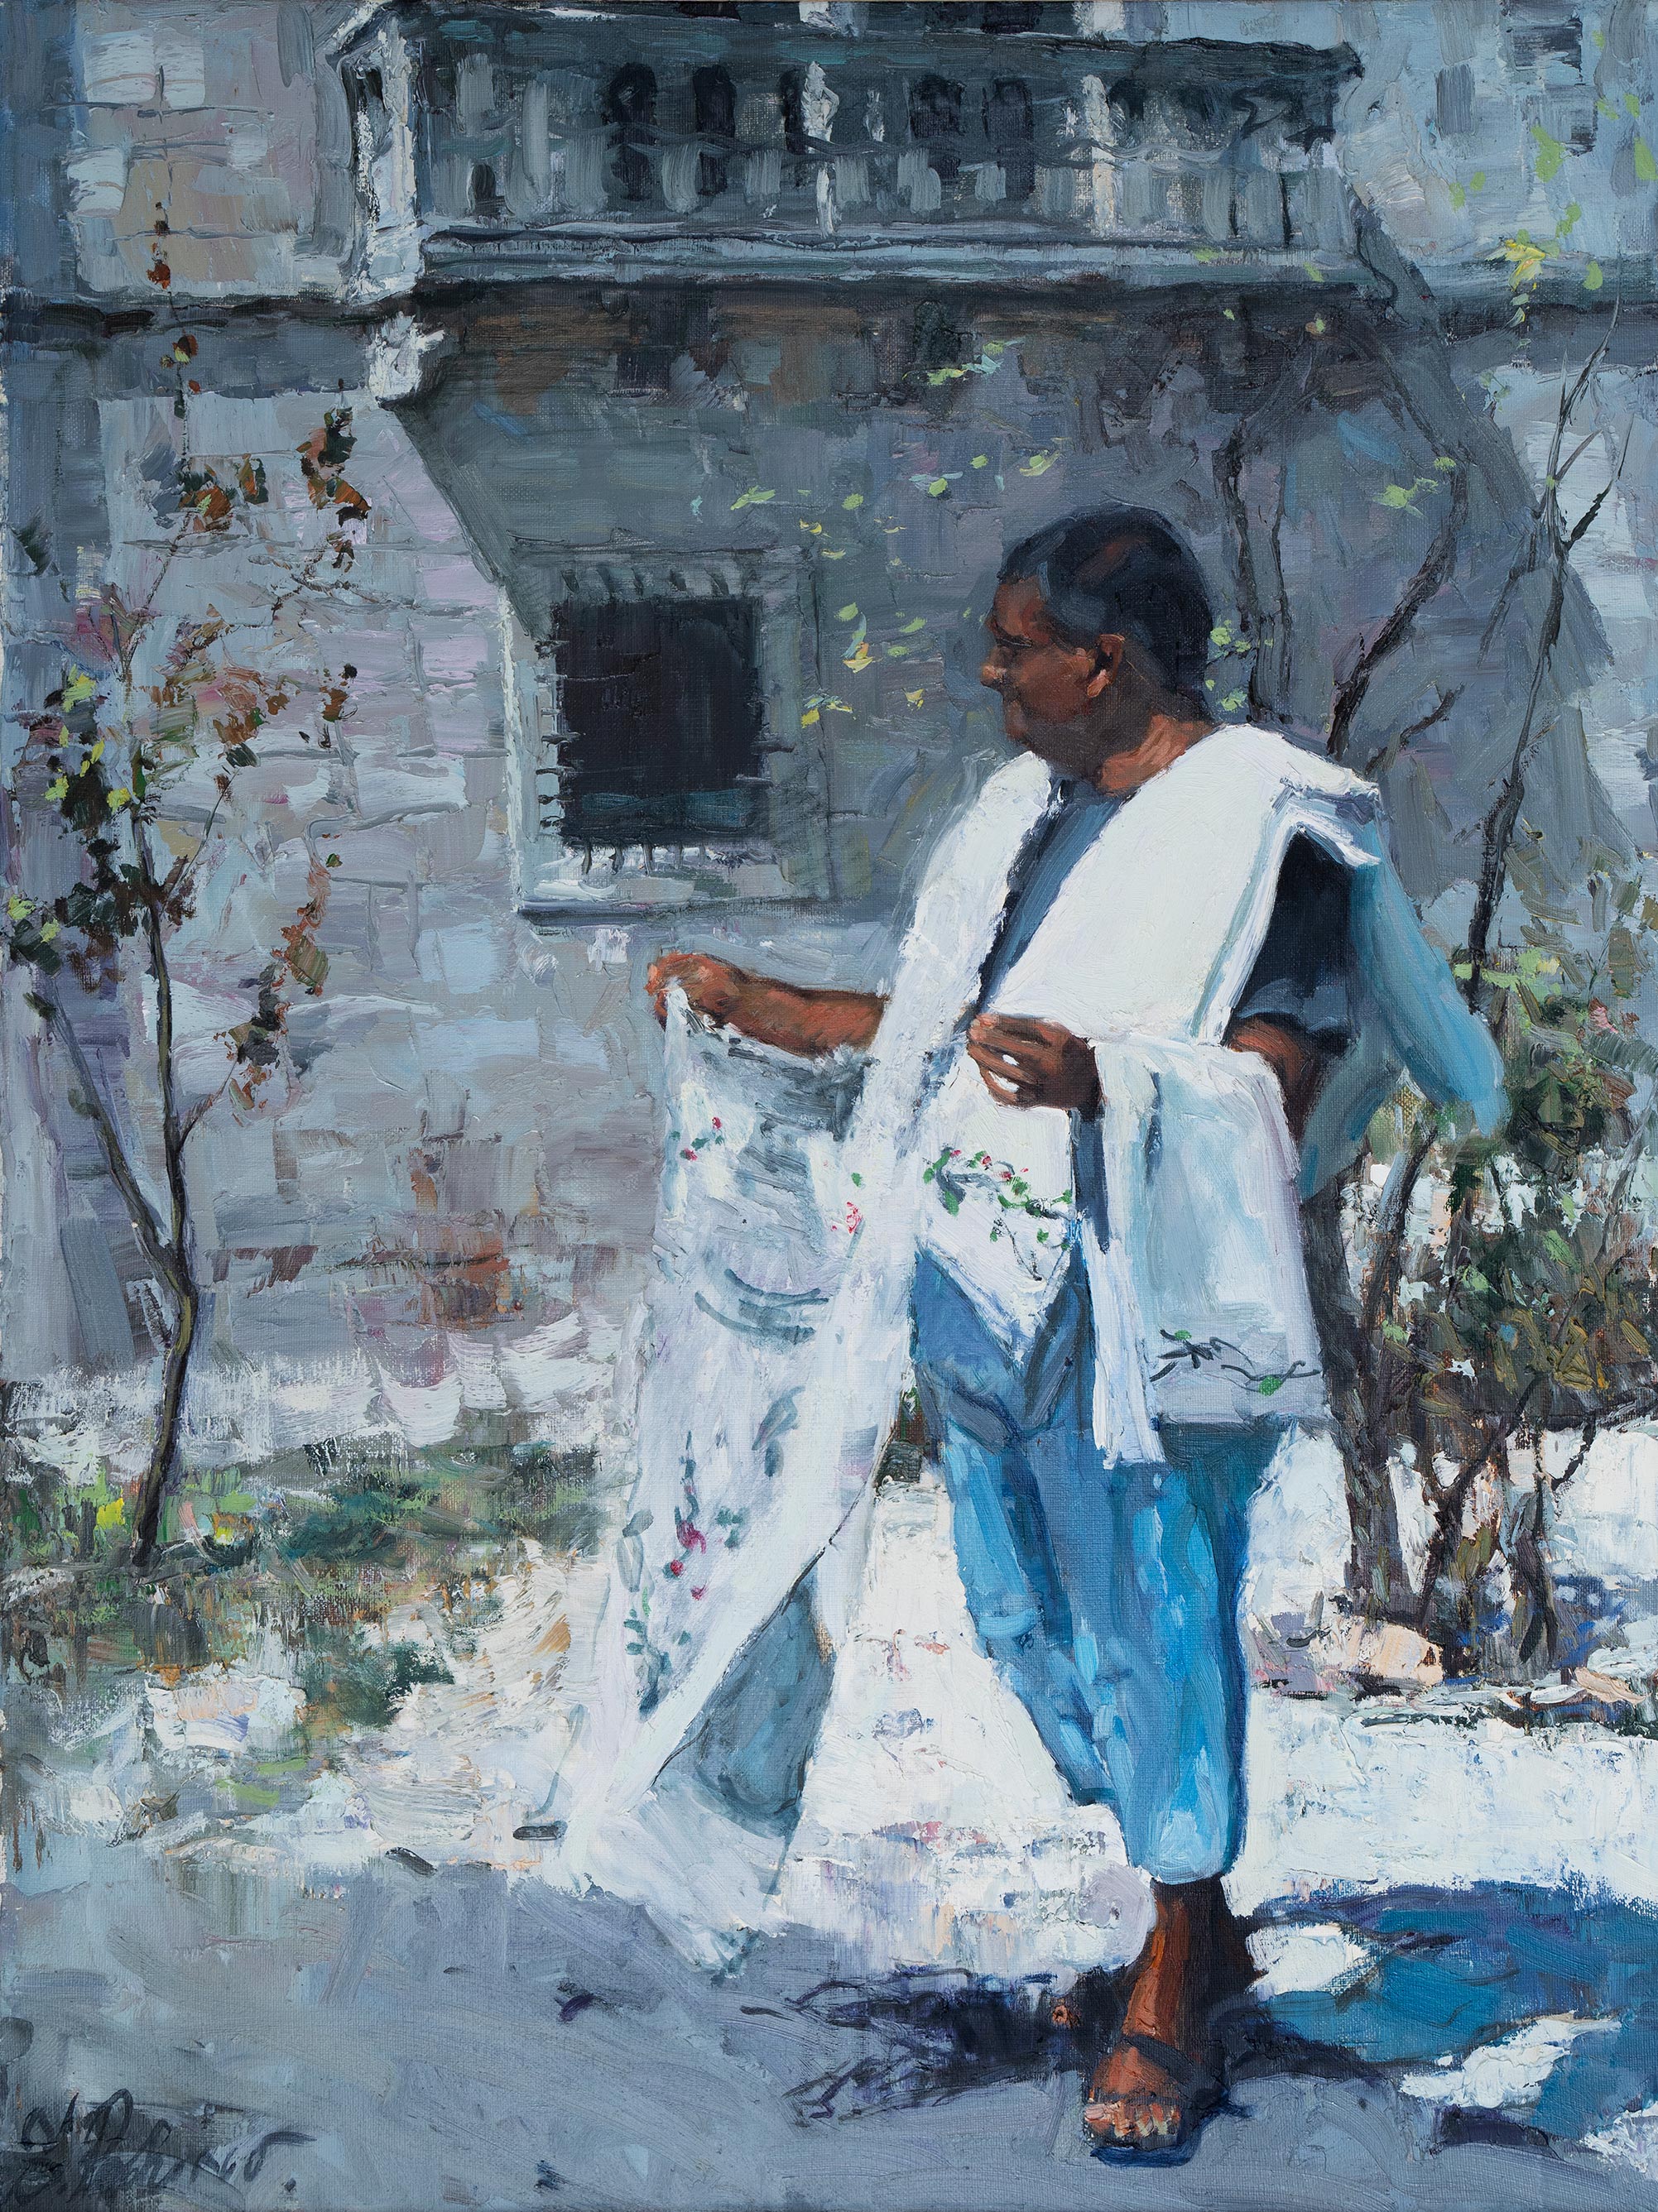 Seller of Lace from Perast - 1, Sergei Prokhorov, 买画 油